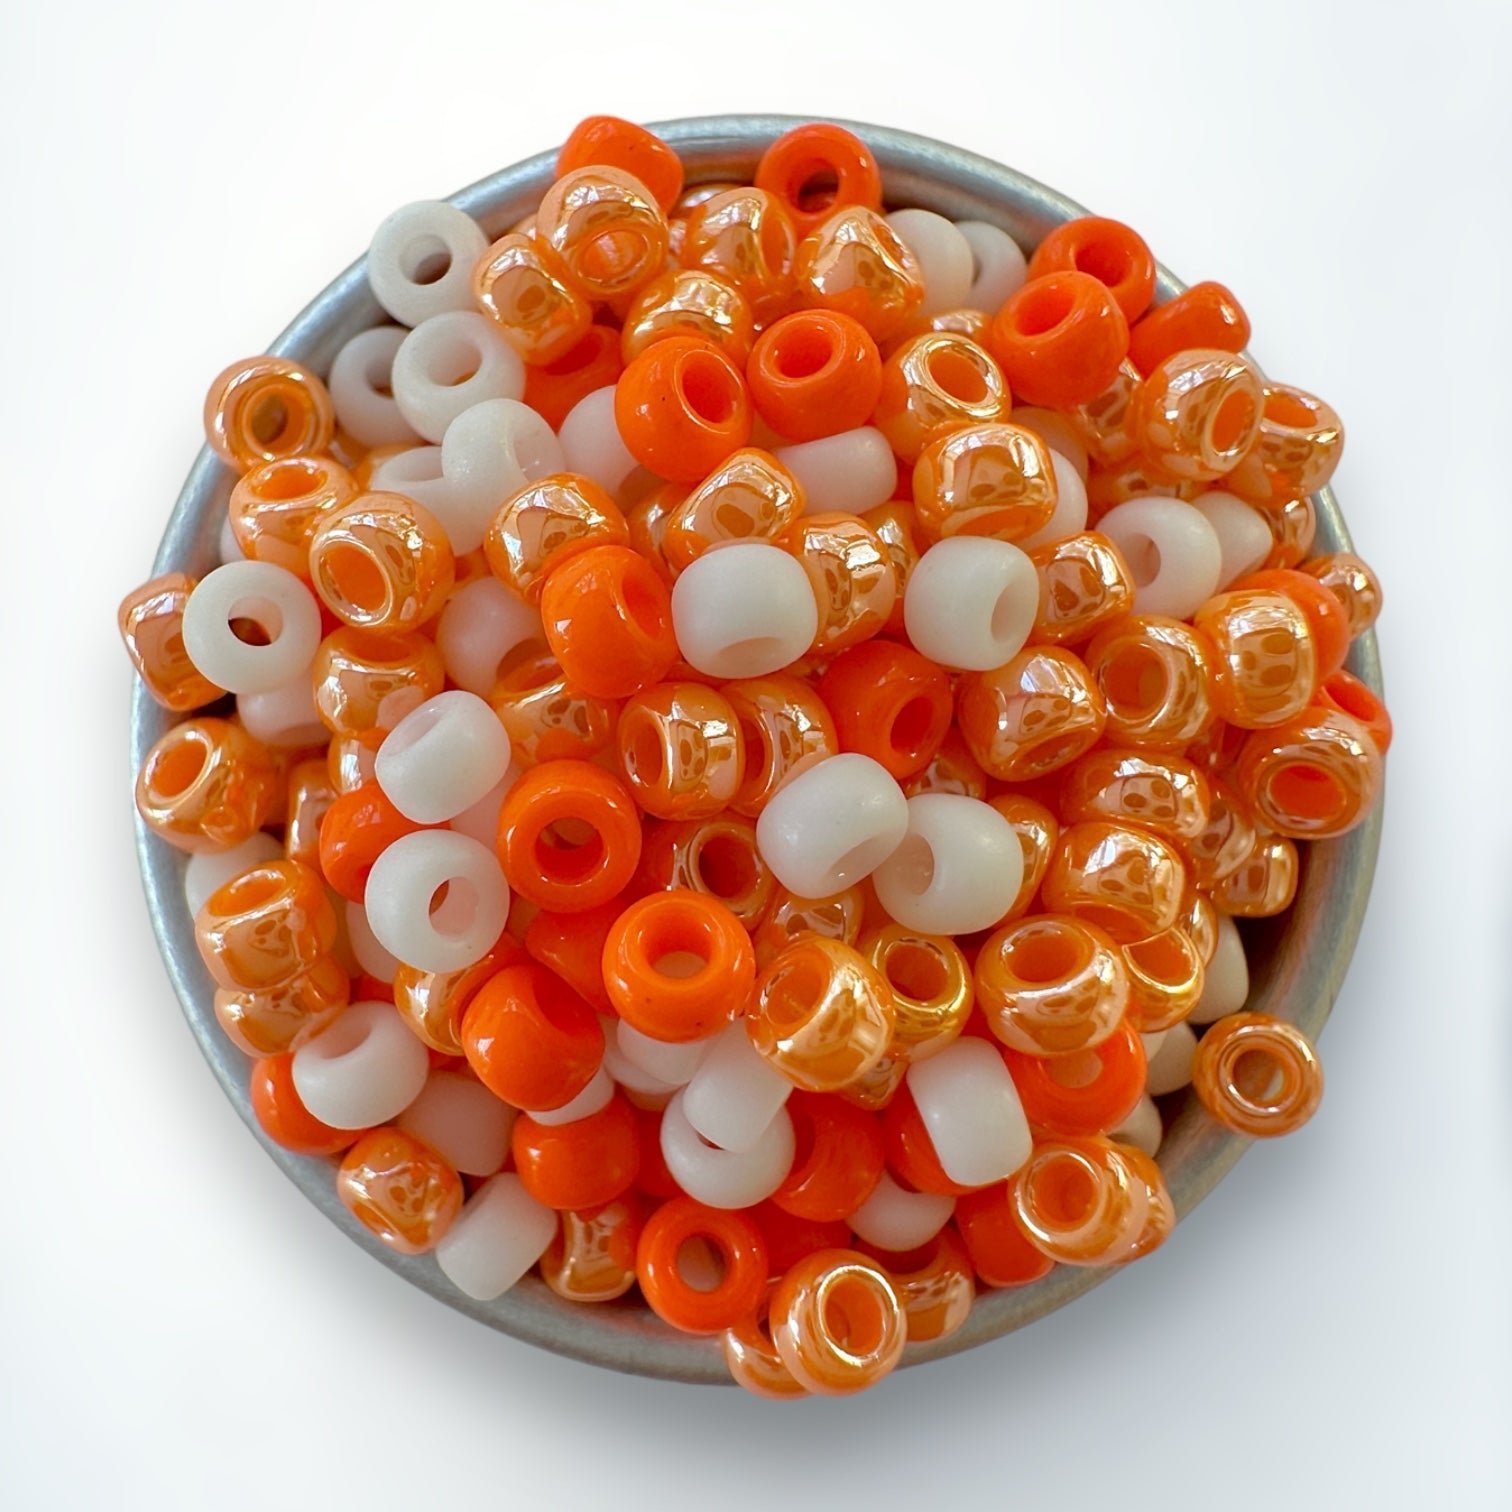 A mix of orange and cream 11/0 Miyuki seed beads by The Bead Mix in a silver container with a white background